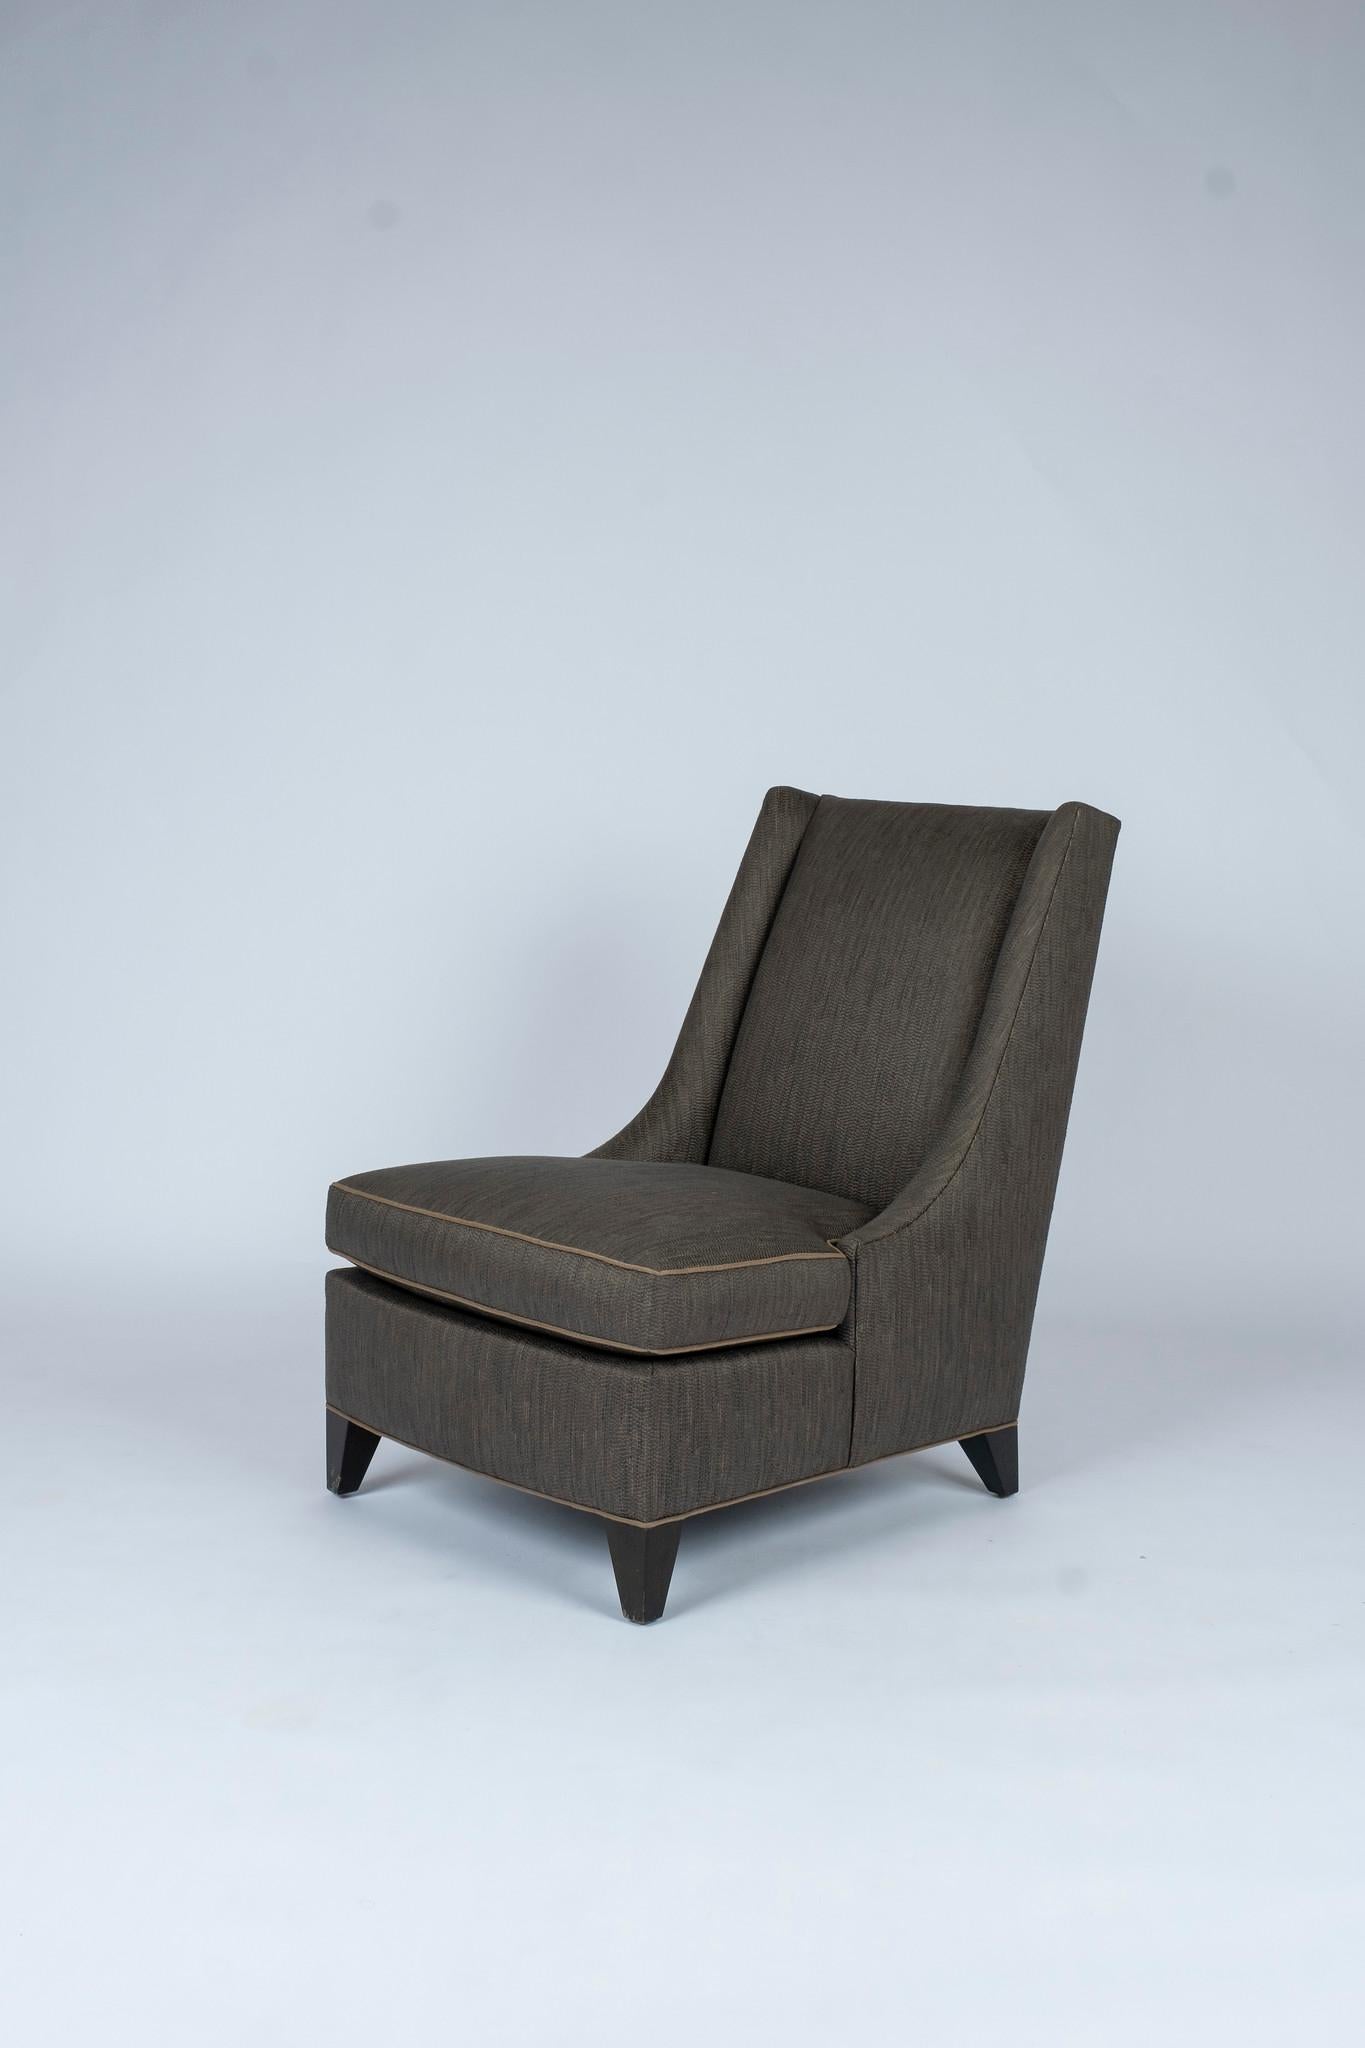 Donghia Milo slipper chair fully upholstered in dark taupe woven jacquard with loose seat, tight back, with feet finished in espresso stained maple wood.